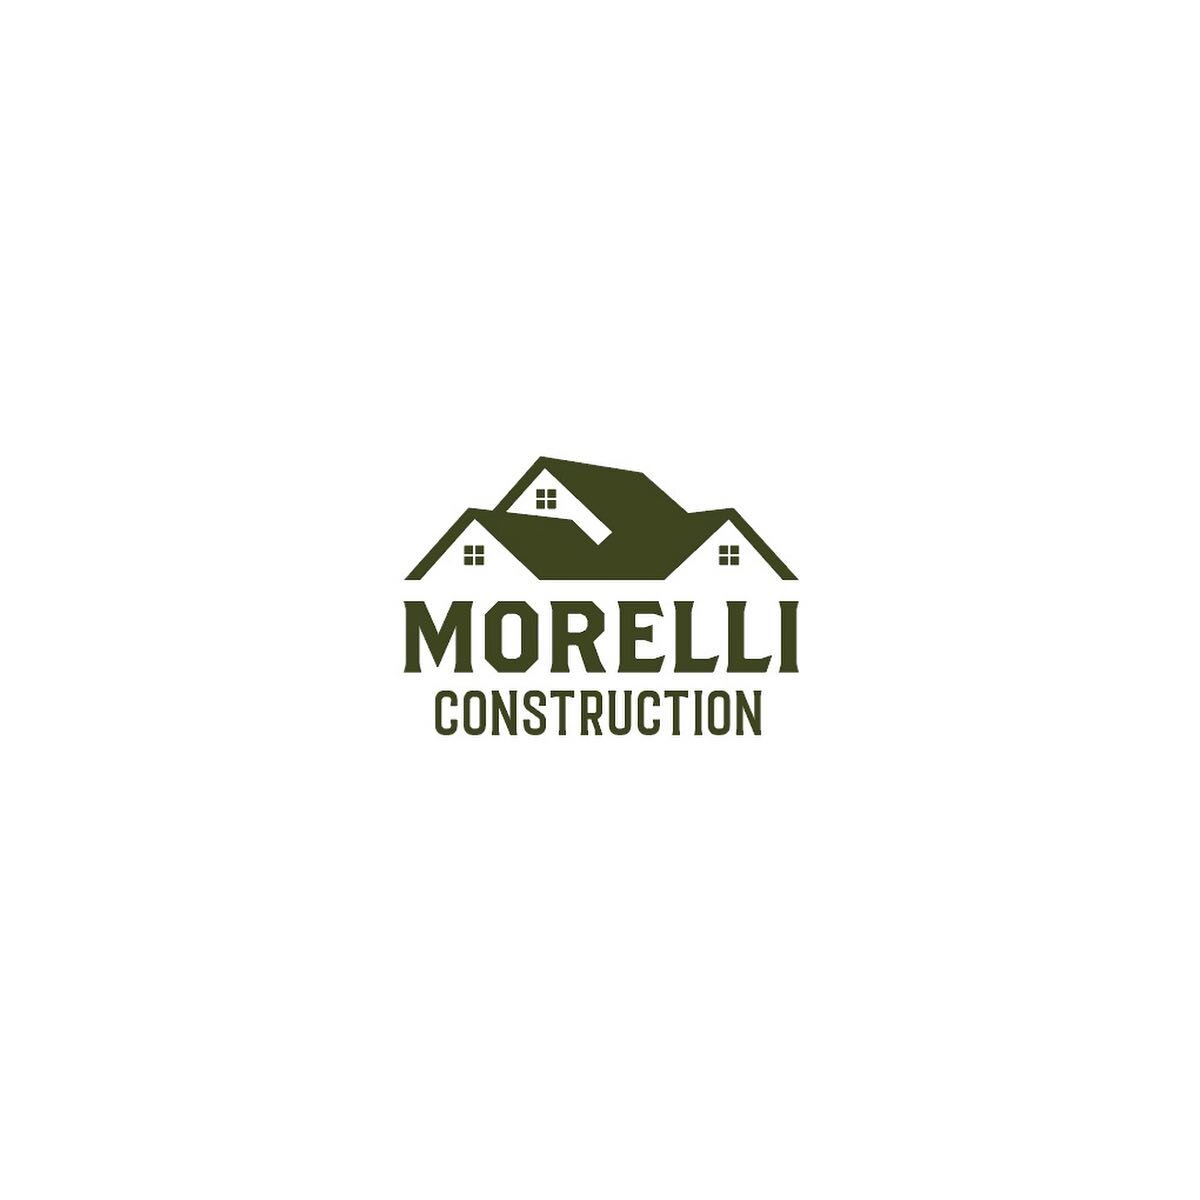 Taking it a few months back to this clean little logo done for @morelli_construction! The merch turned out great thanks to @themuddymerch! If you or someone you know is needing design services of any kind, send me a message! Currently booking limited